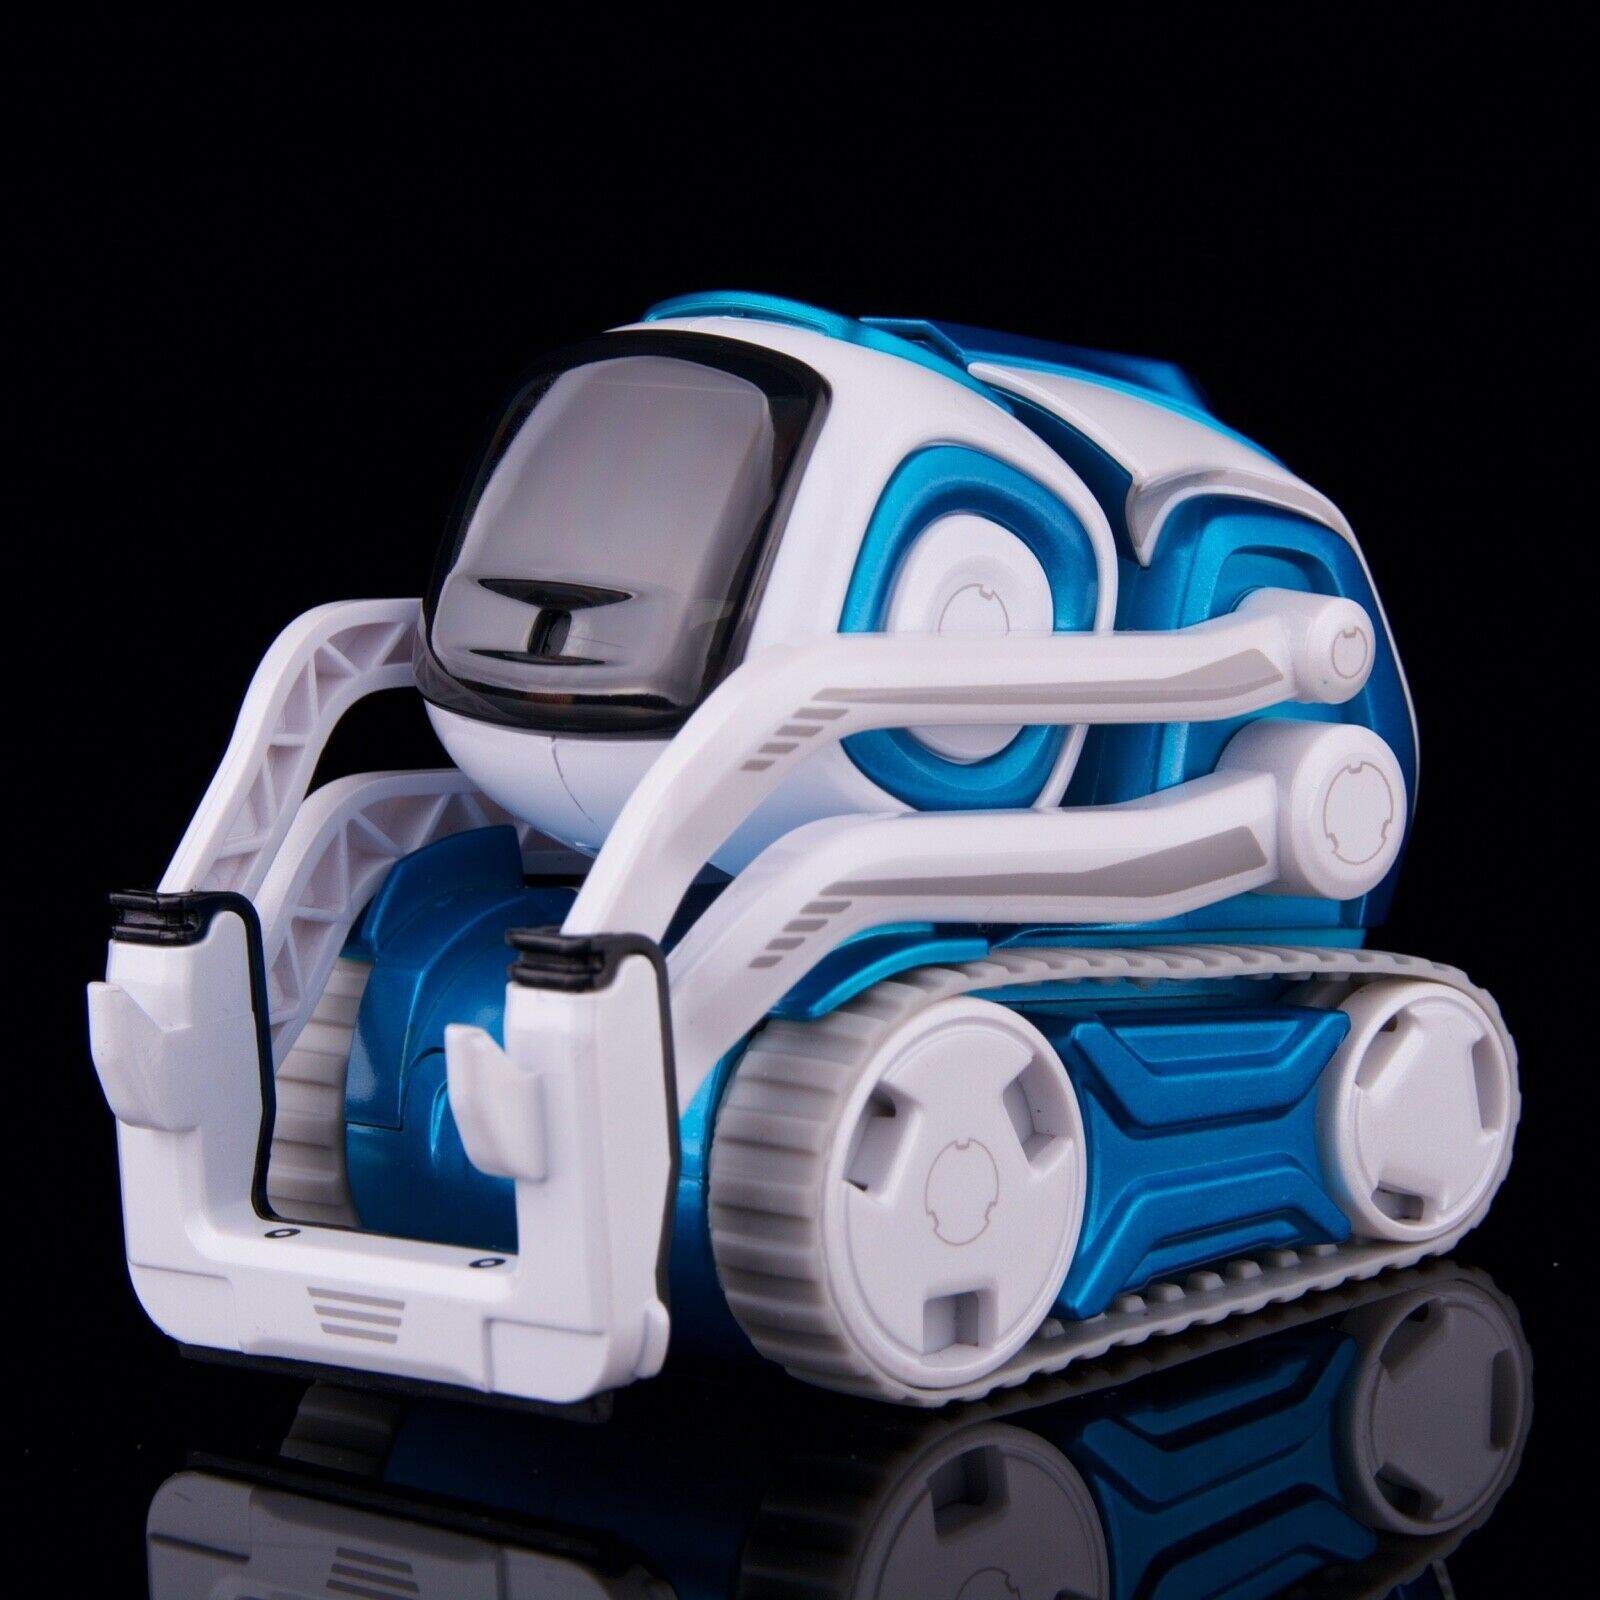 Anki Cozmo Artificial Intelligence Smart Education Robot Toy Limited Edition White Blue